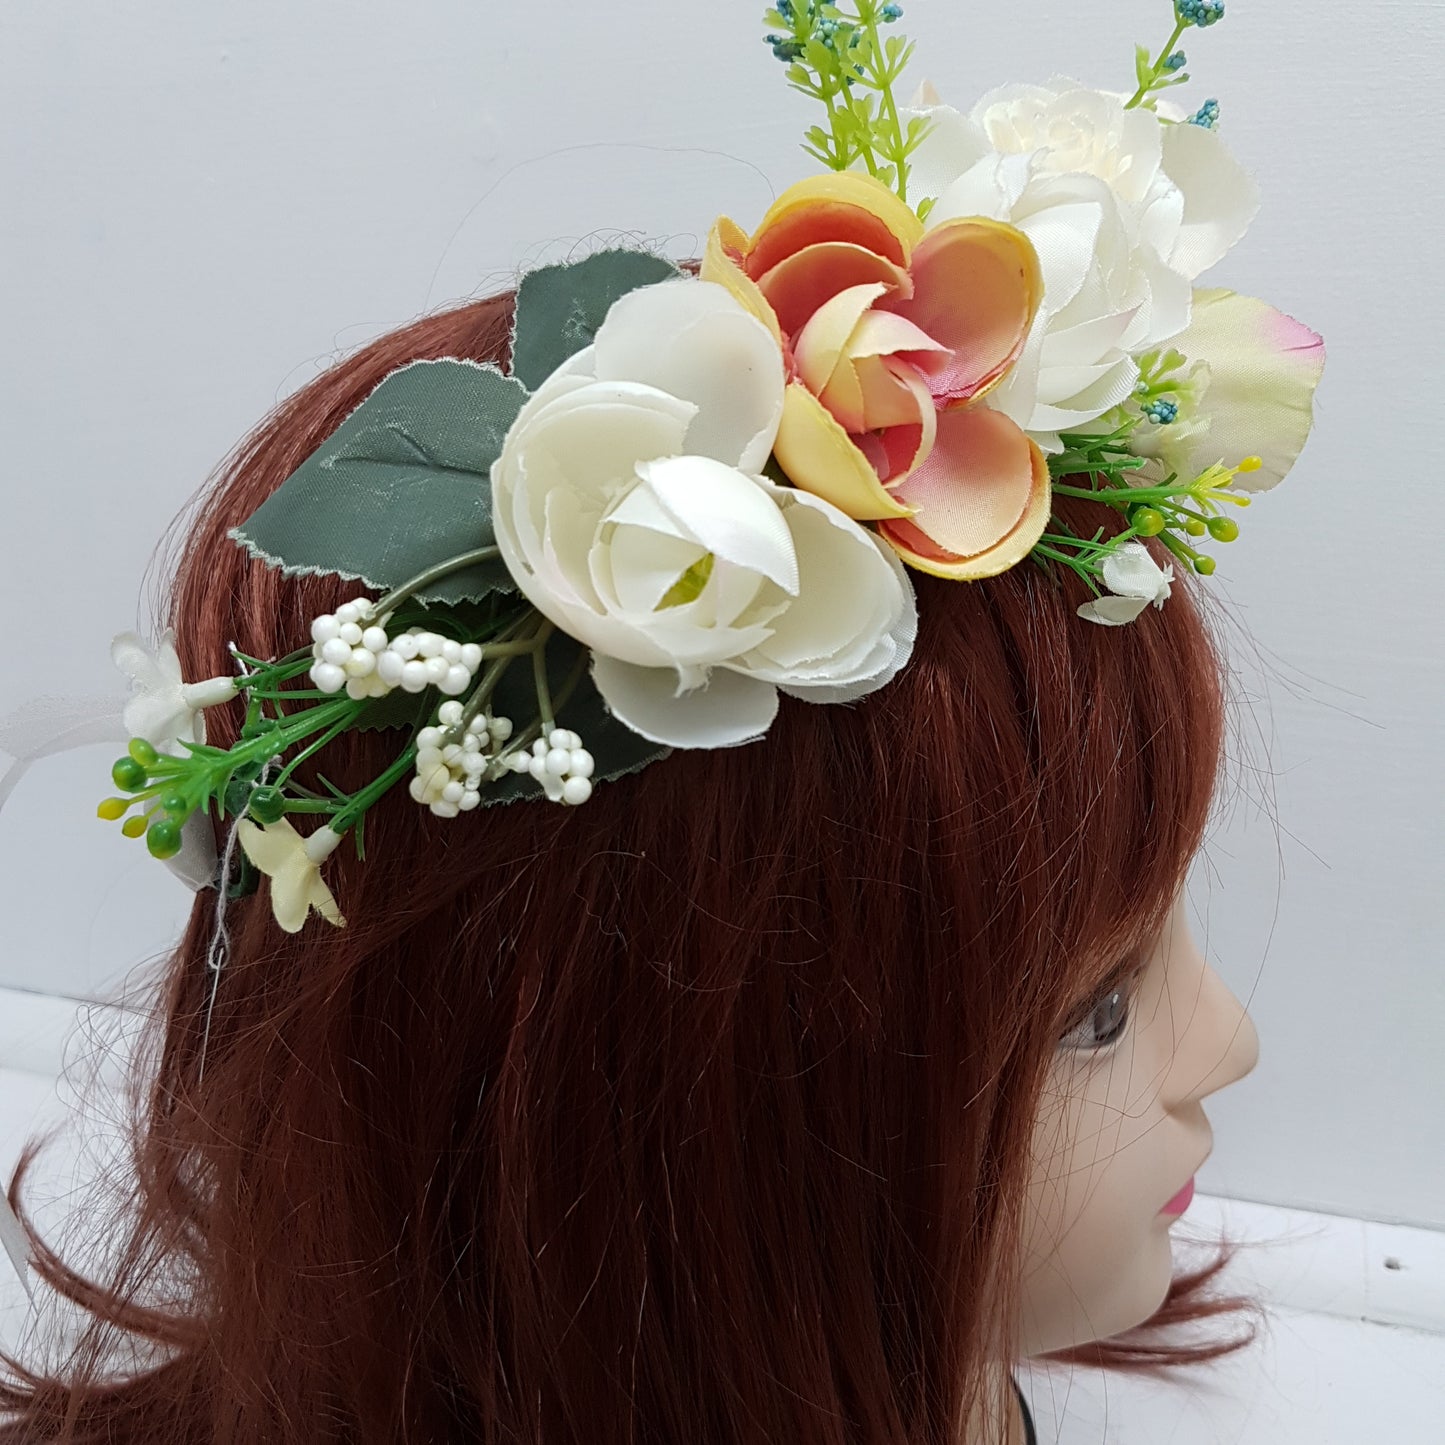 Lovely Floral Hair Crown